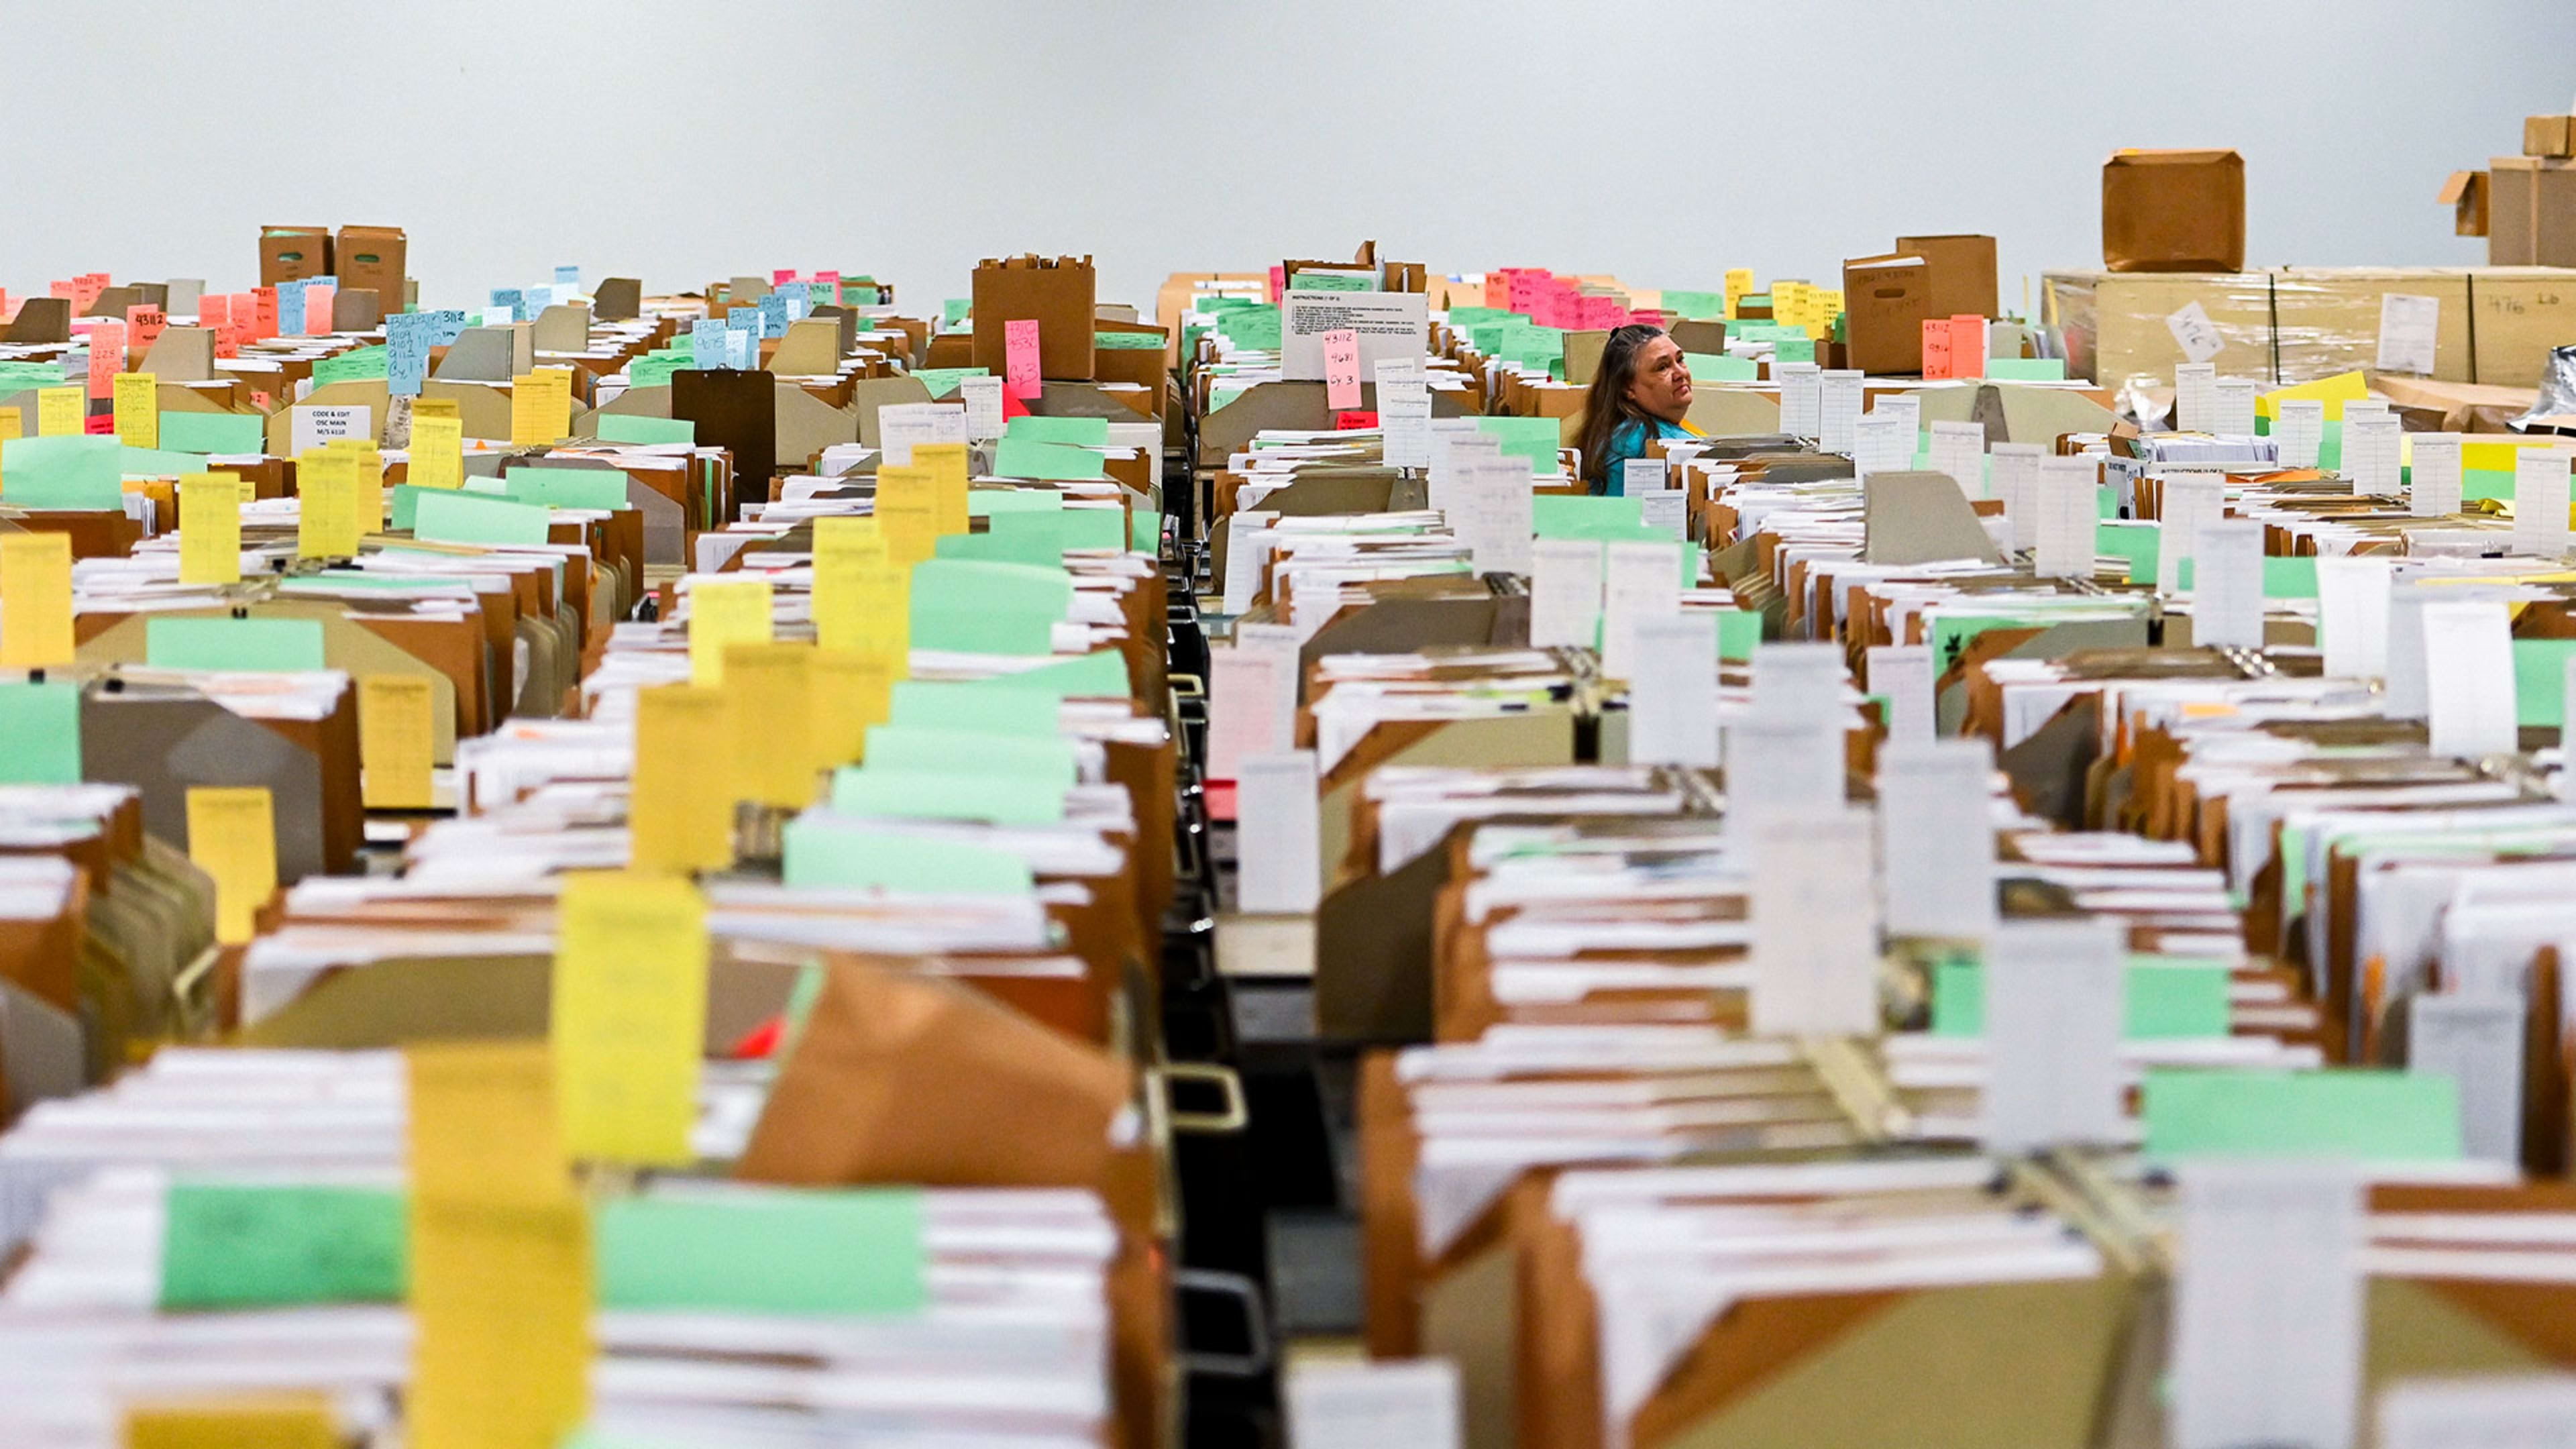 The IRS backlog of paper tax returns is even more horrifying when you see it in pictures